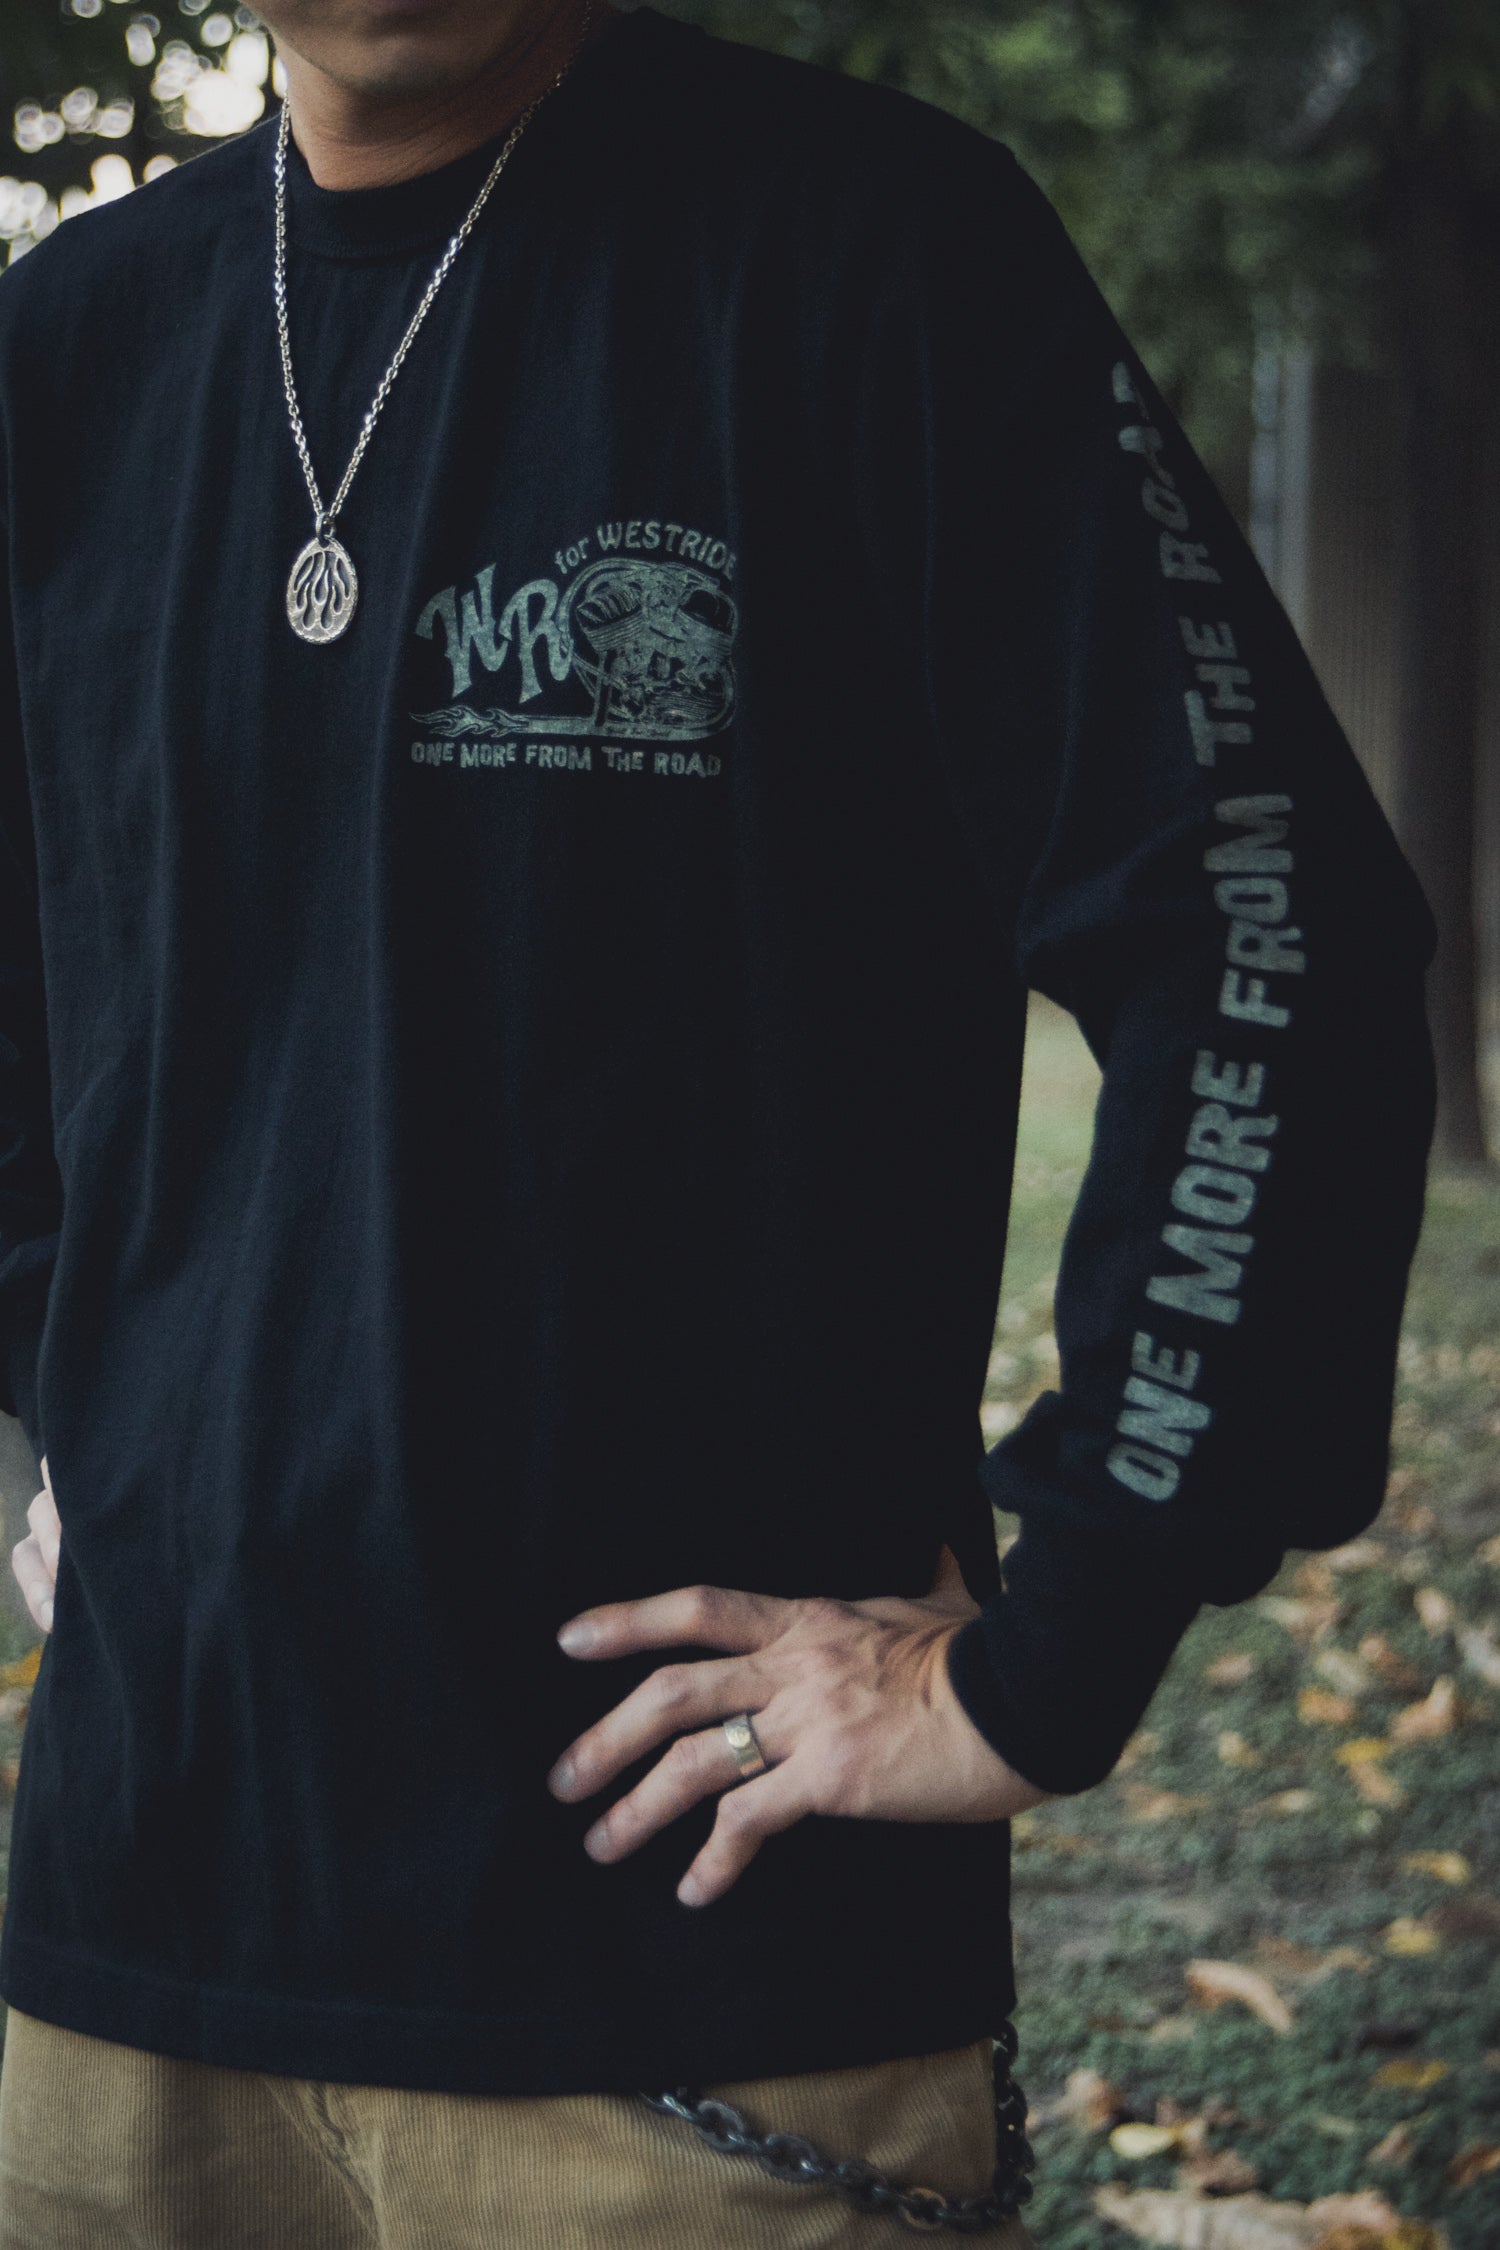 WR FOR WEST RIDE LONG SLEEVE TEE - BLACK - May club